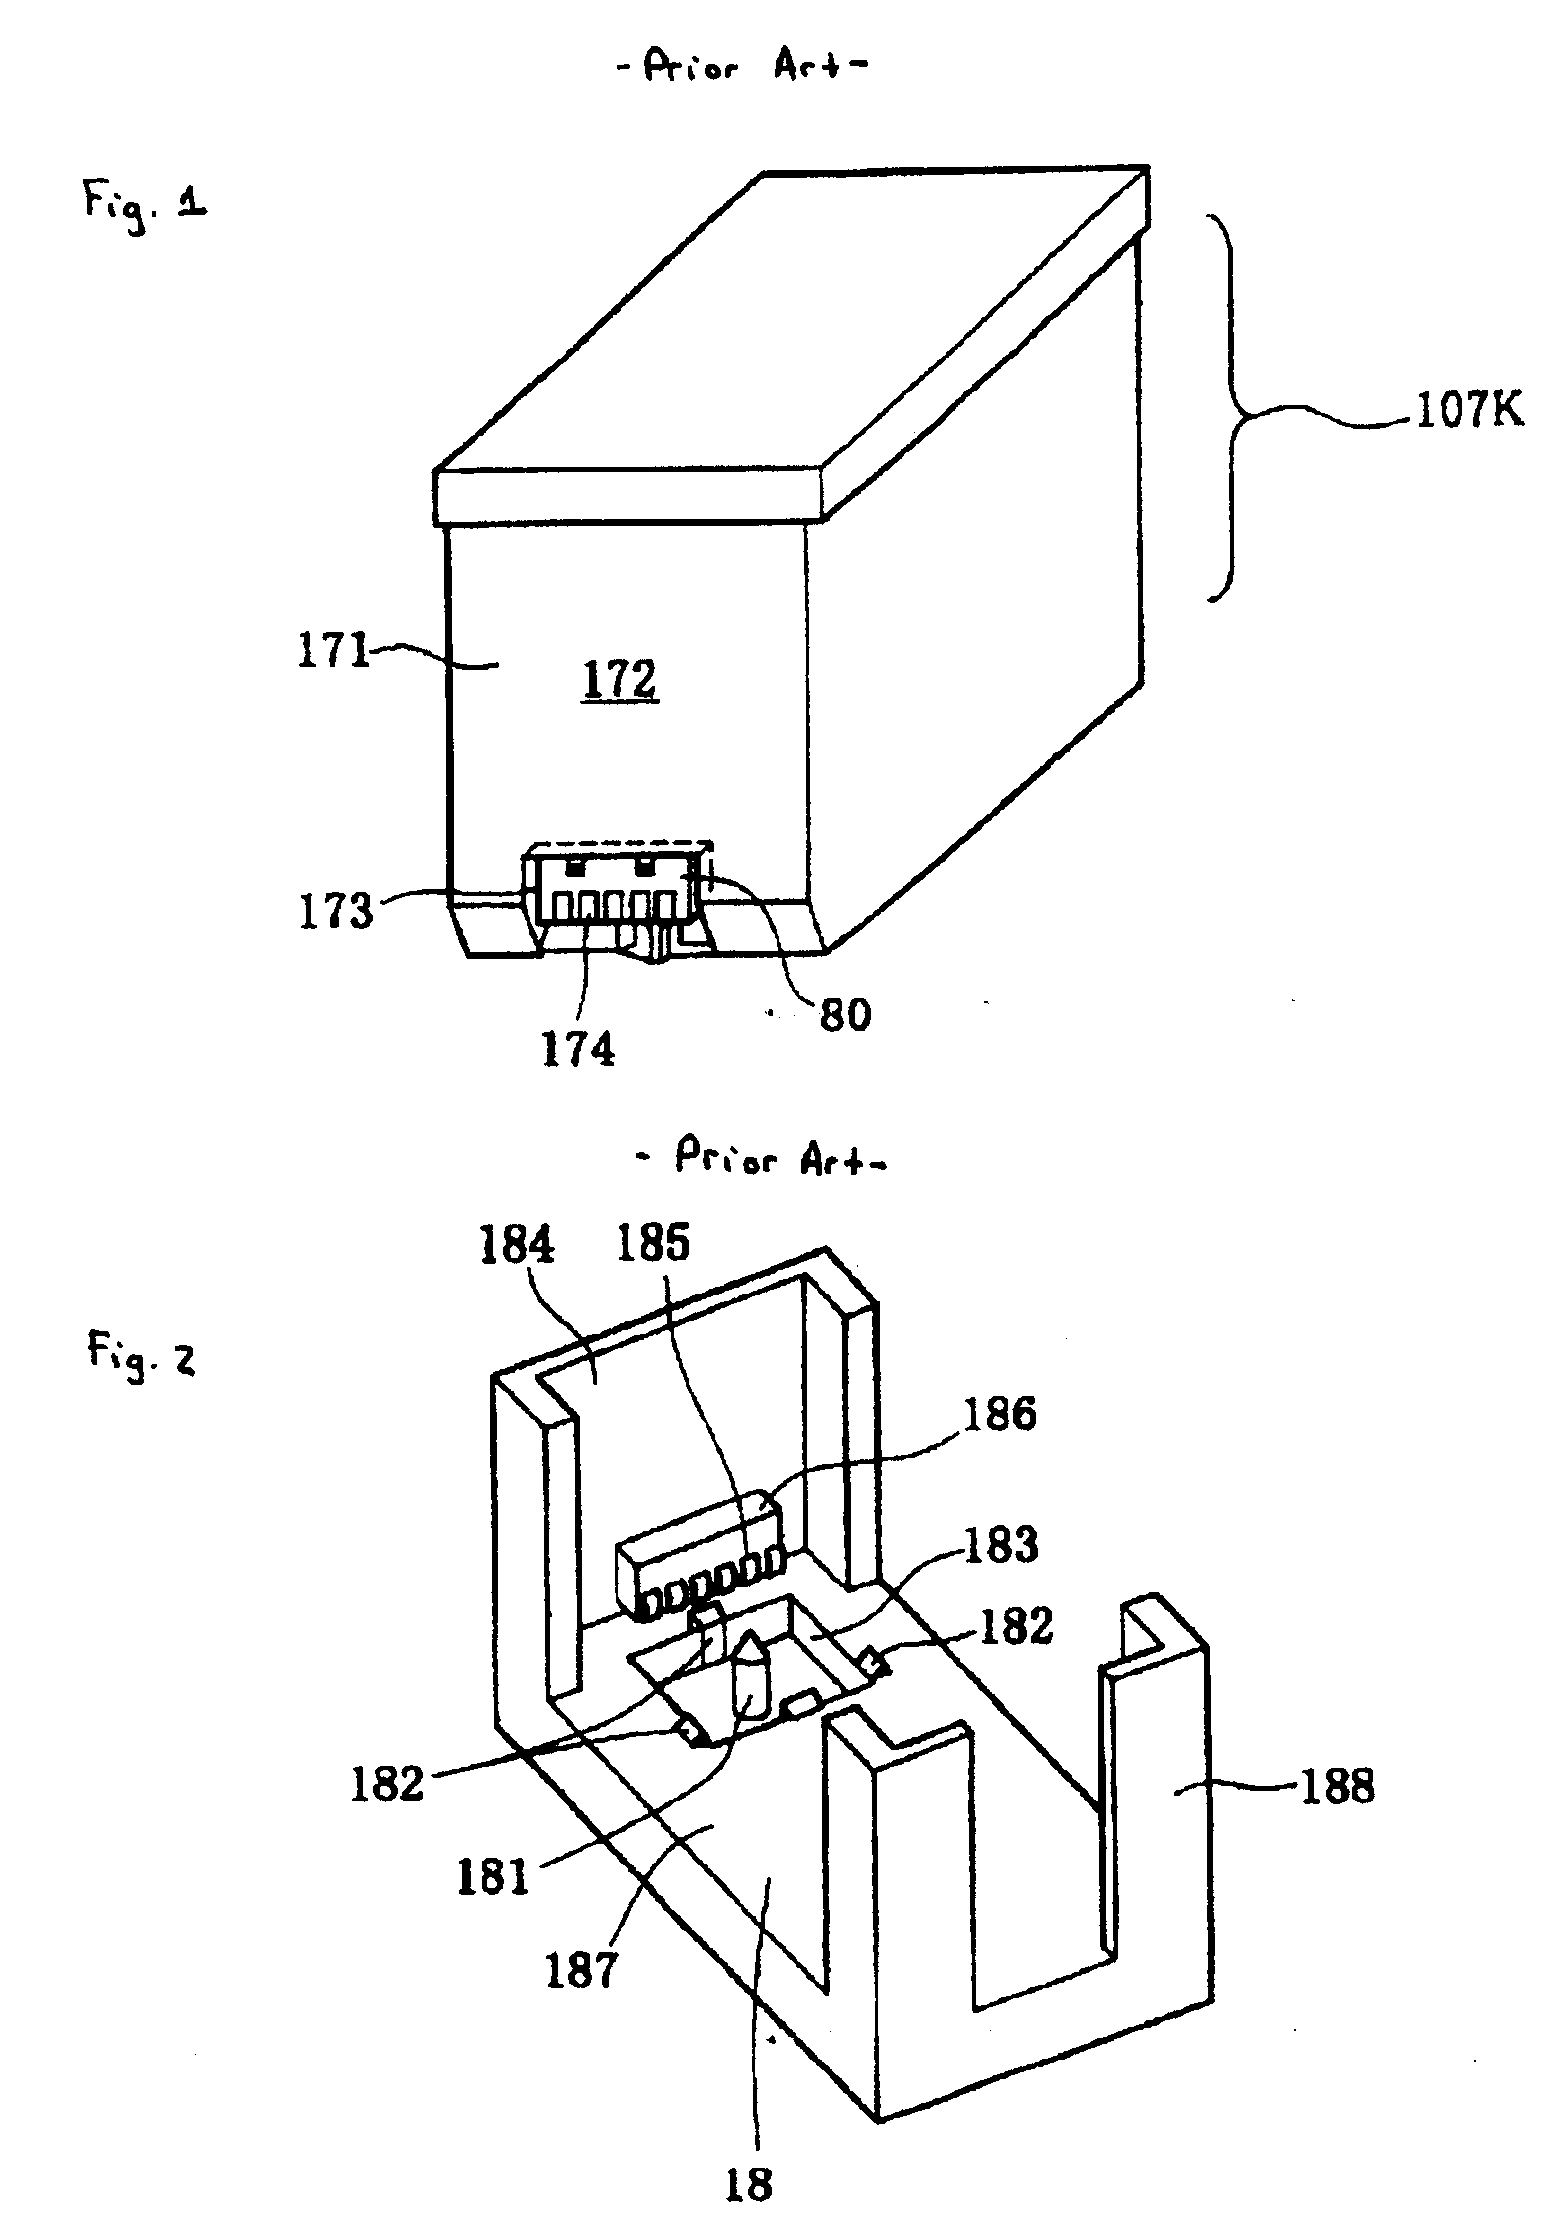 Data storage device mounting arrangement for printing device